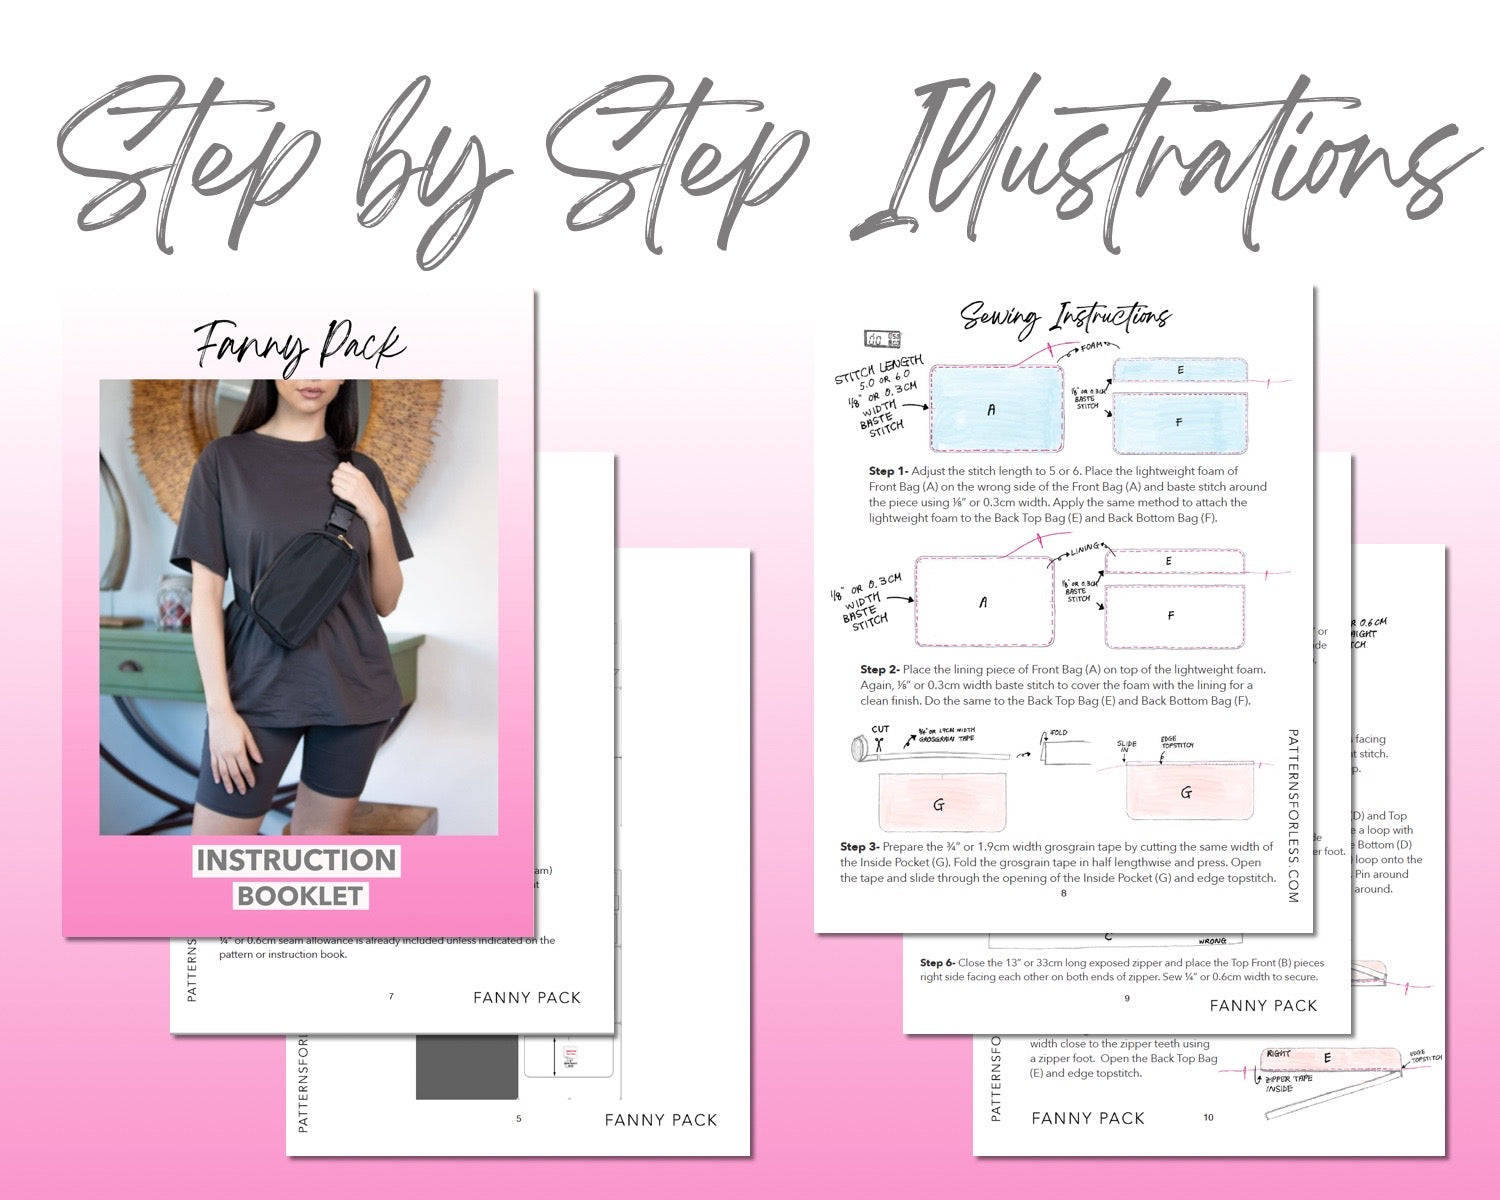 Fanny Pack sewing pattern step by step illustrations.